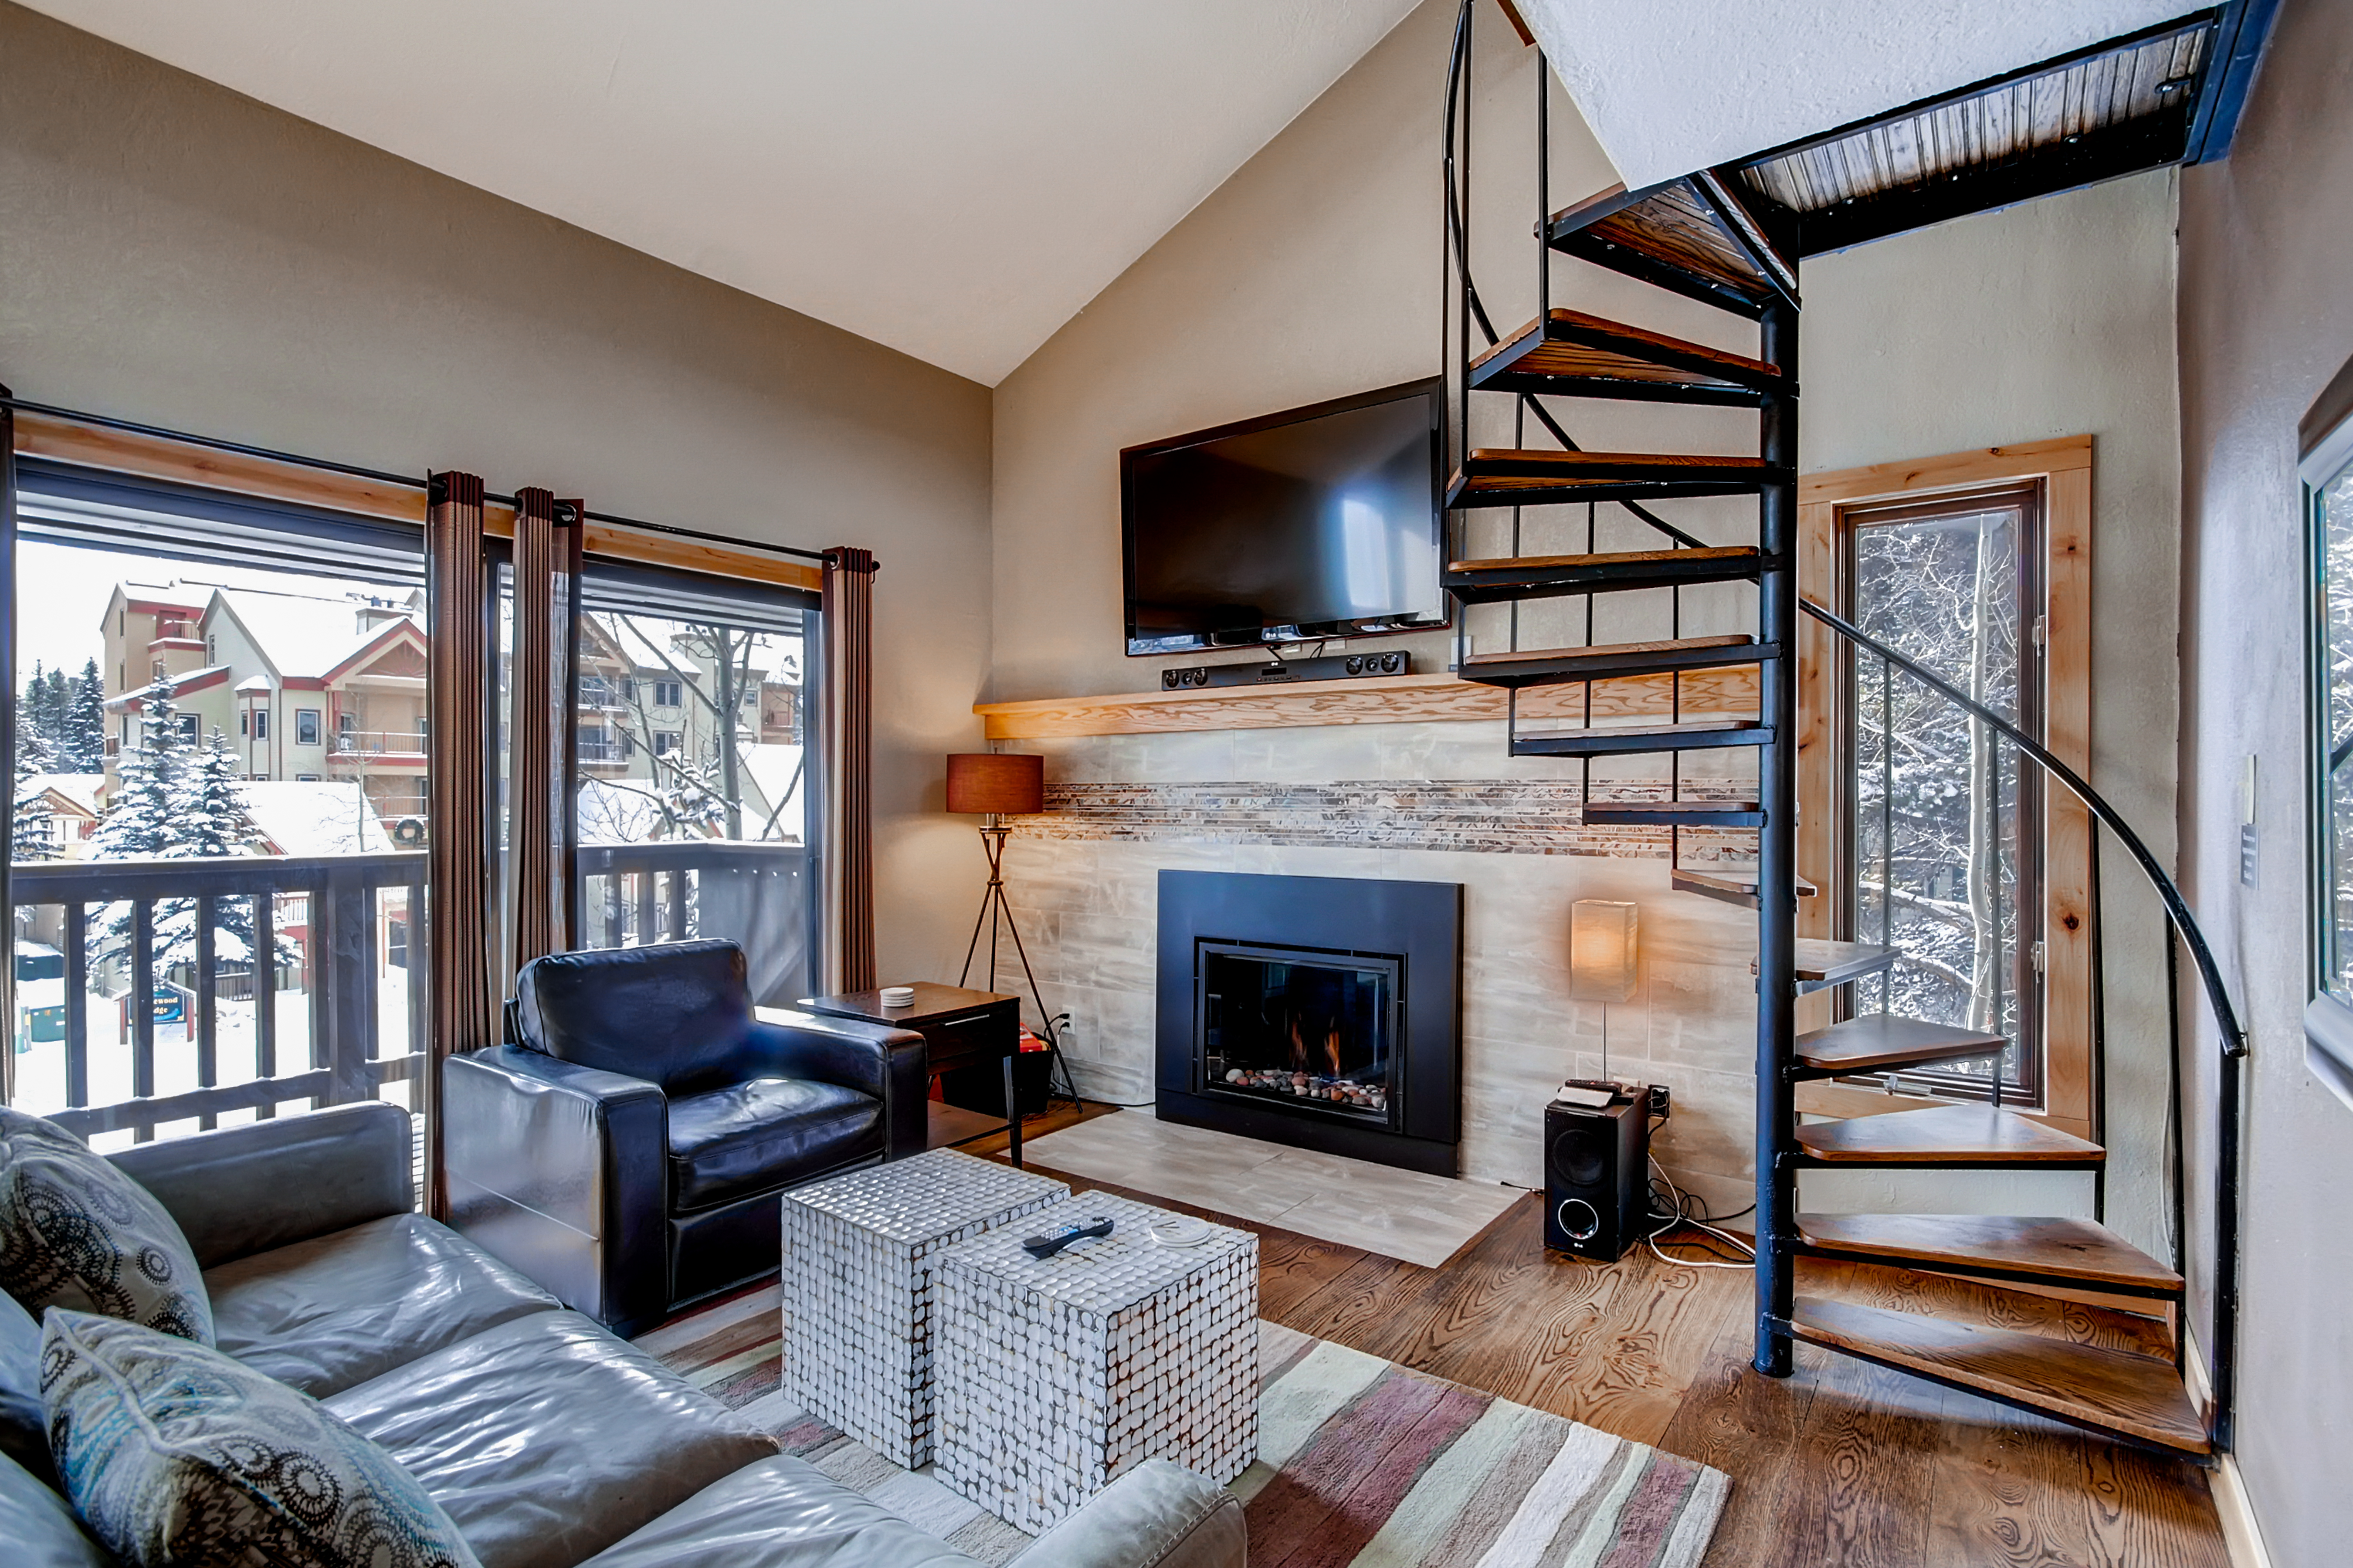 Relax by the gas fireplace in the cozy living room.